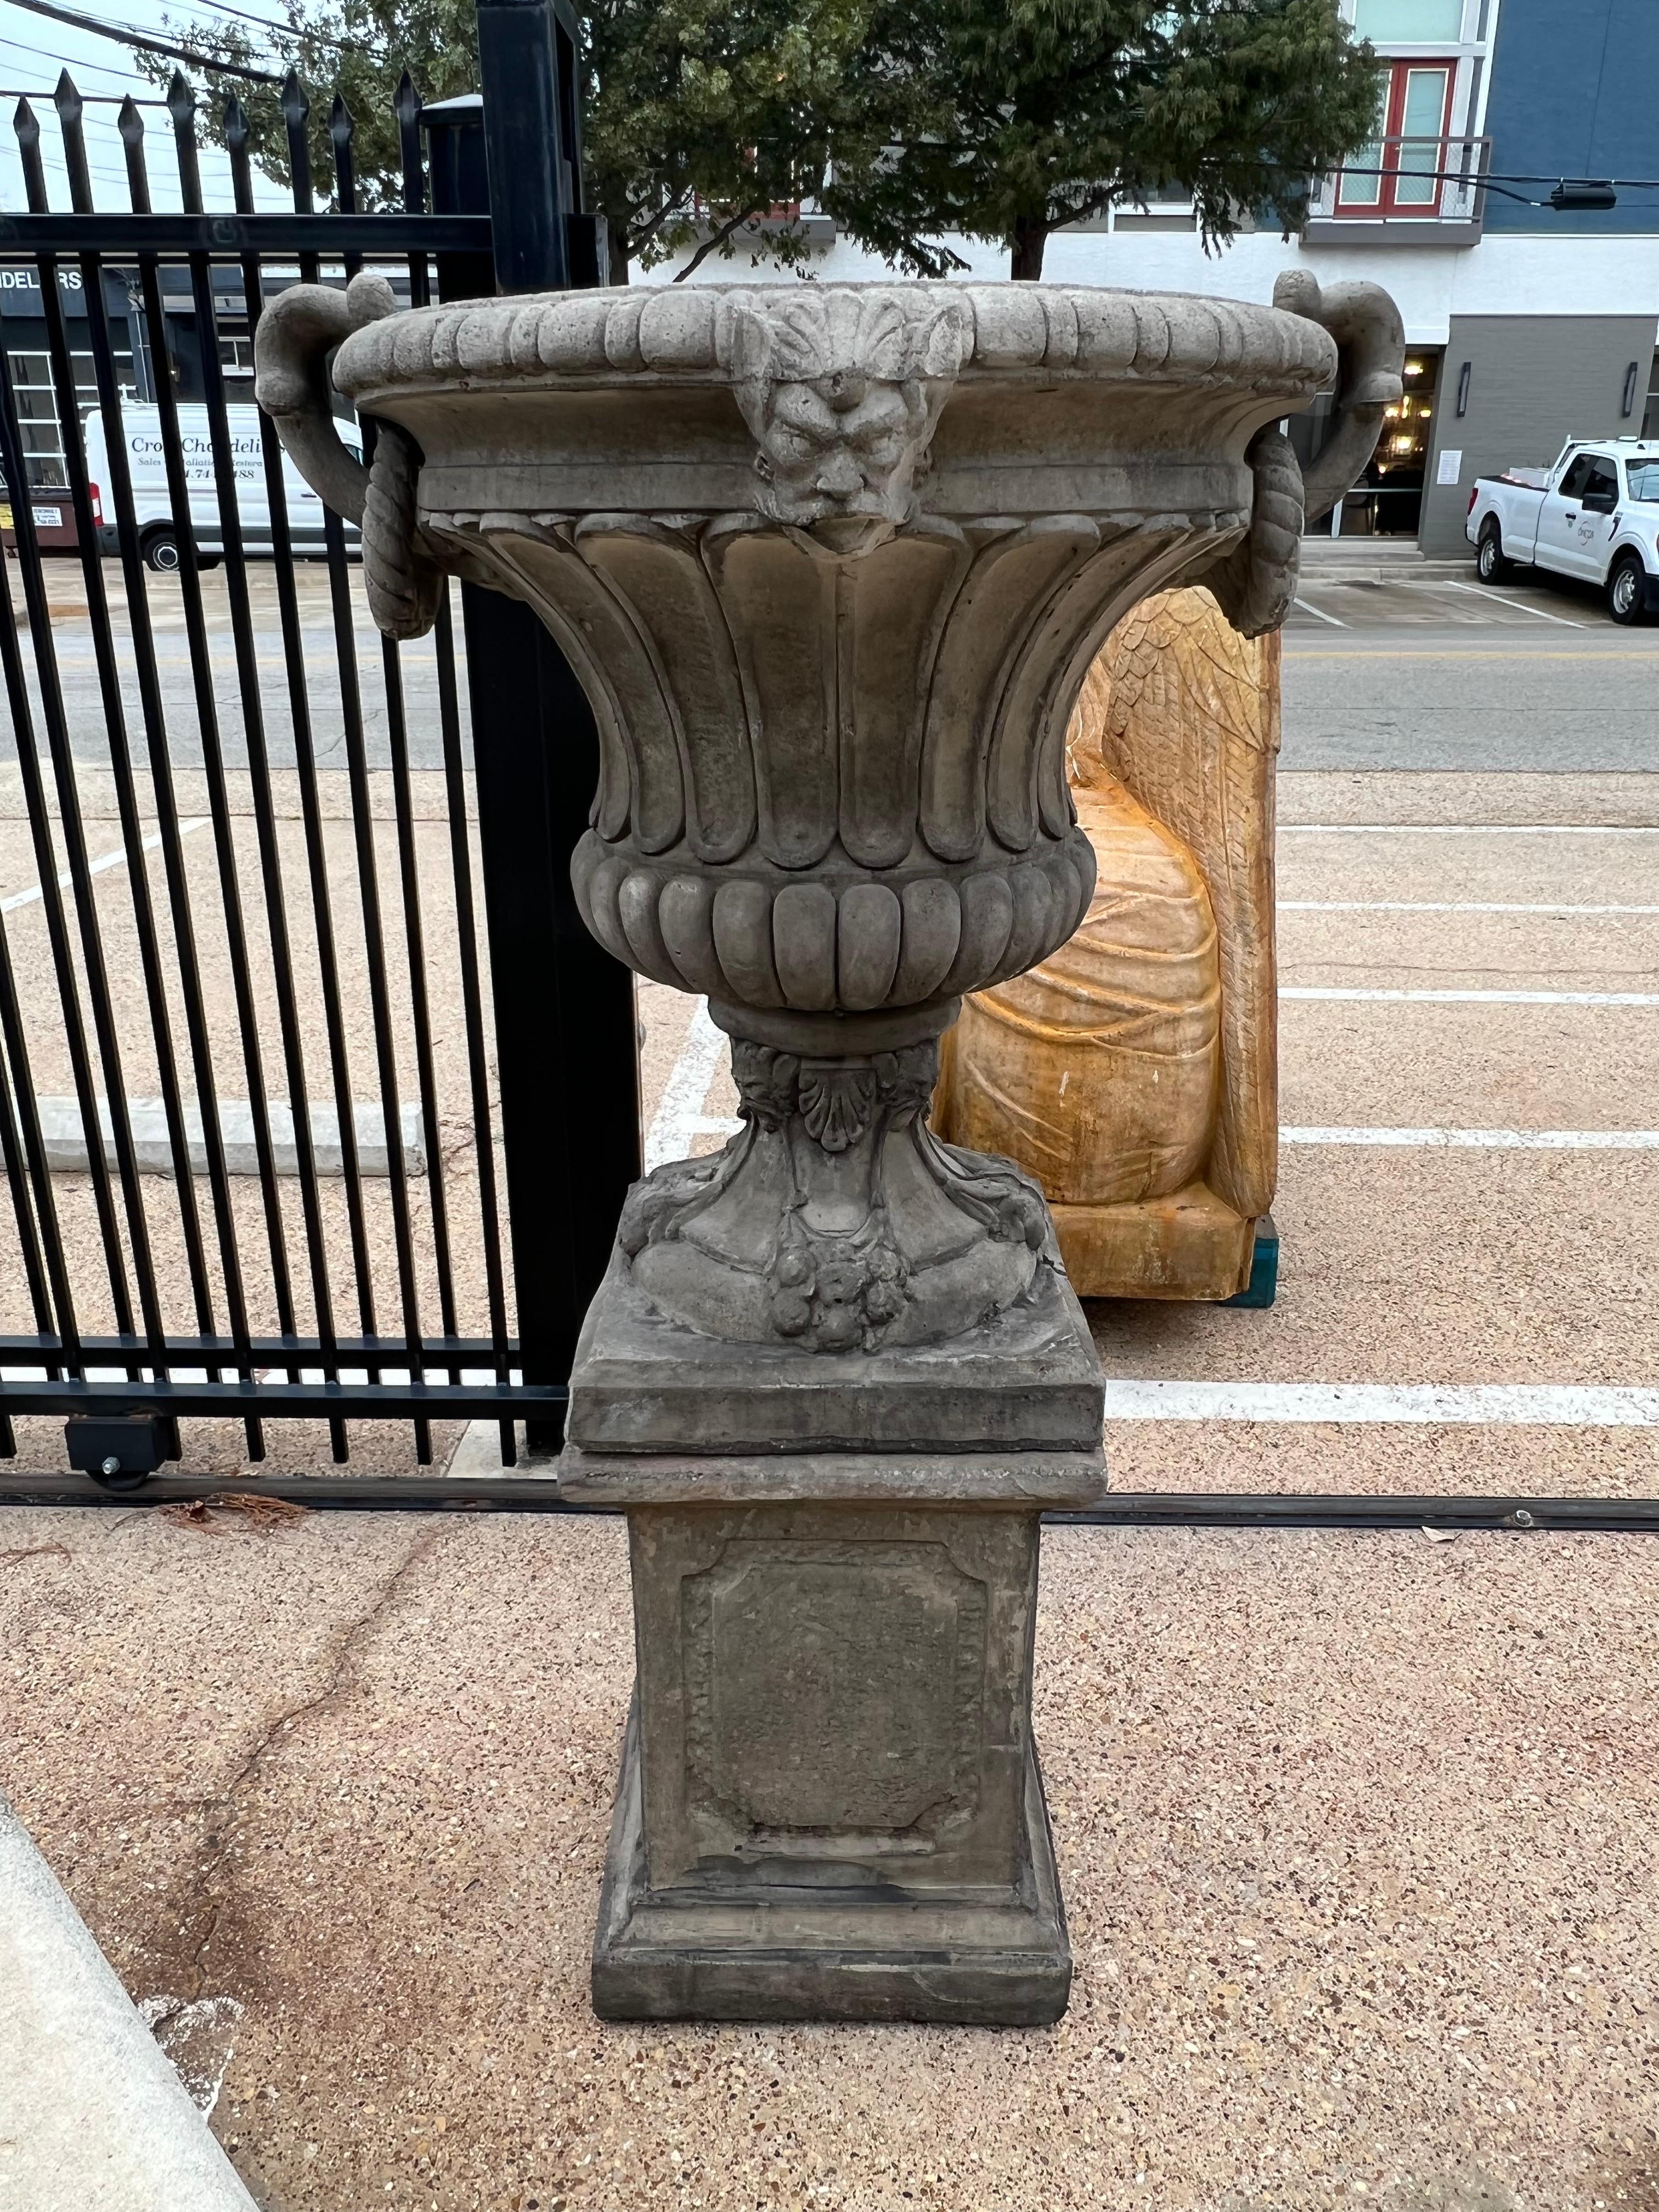 These large cast vases on pedestals from France would look wonderful flanking the entrance of a drive or standing at the corners of a pool.  The detailed vases are decorated with repeating patterns of gadrooning, mascarons, and pronounced handles